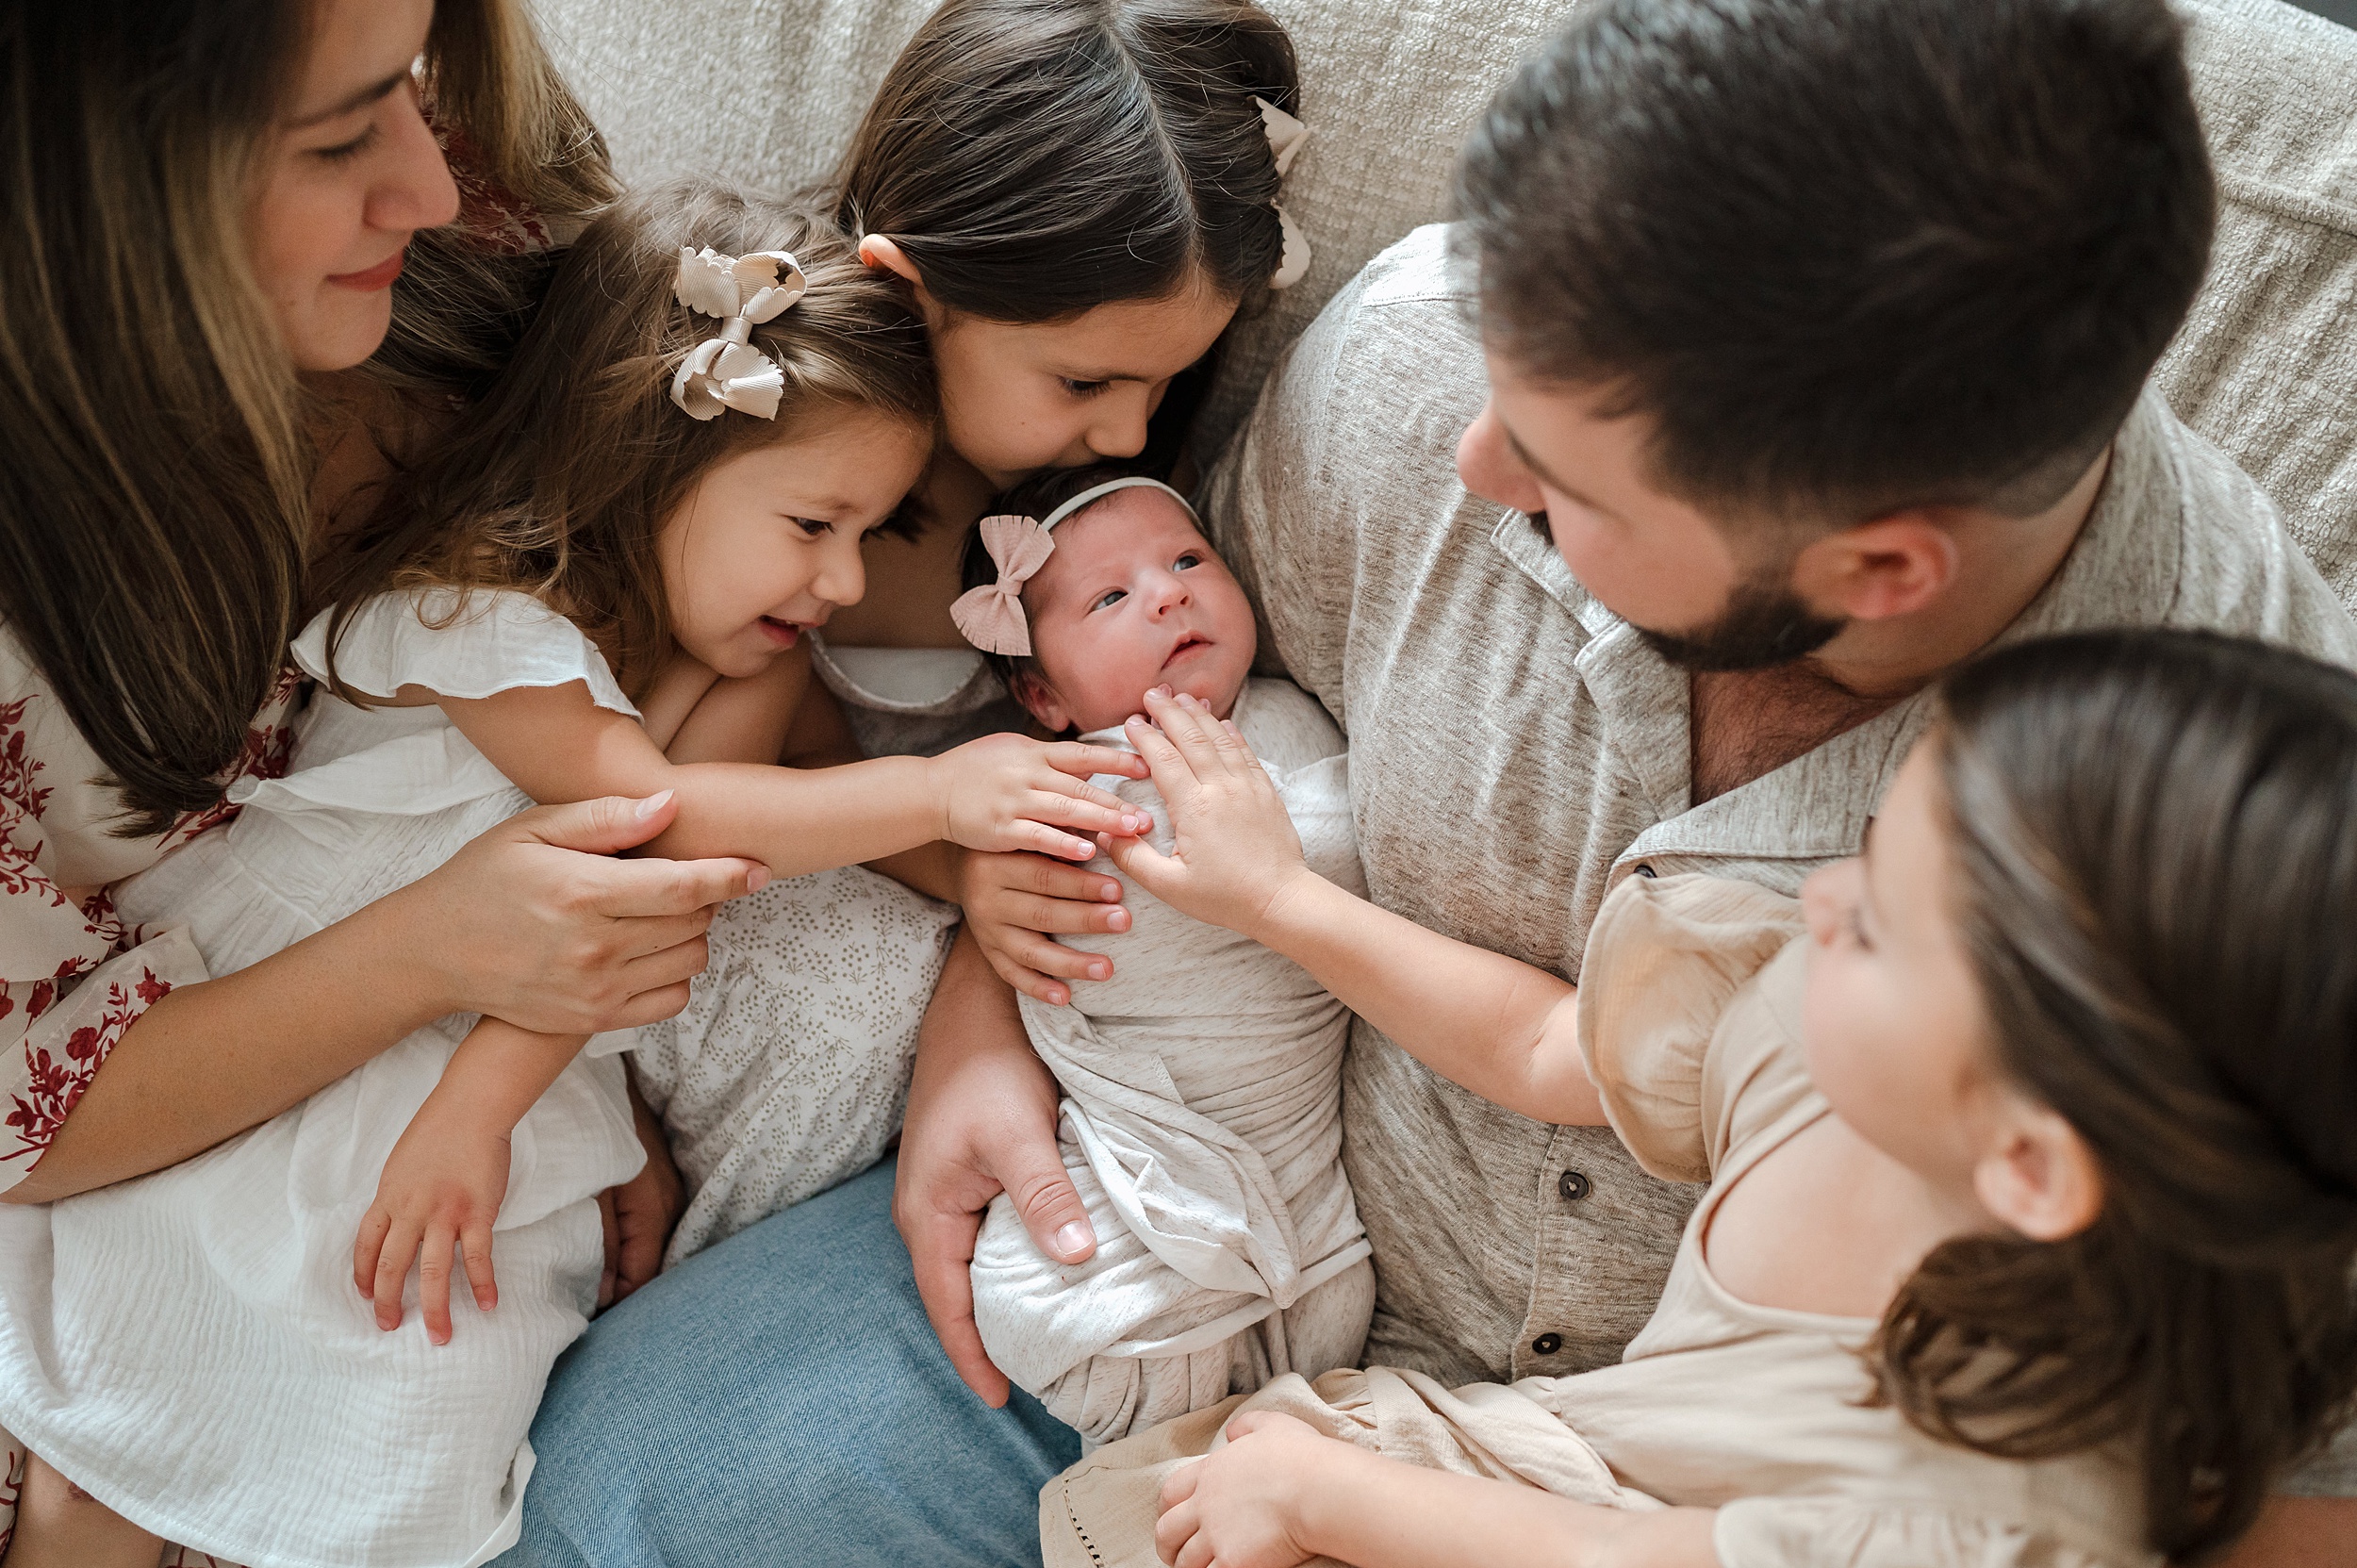 Dad holds his newborn daughter while his wife and three other daughters lean in and place hands on her